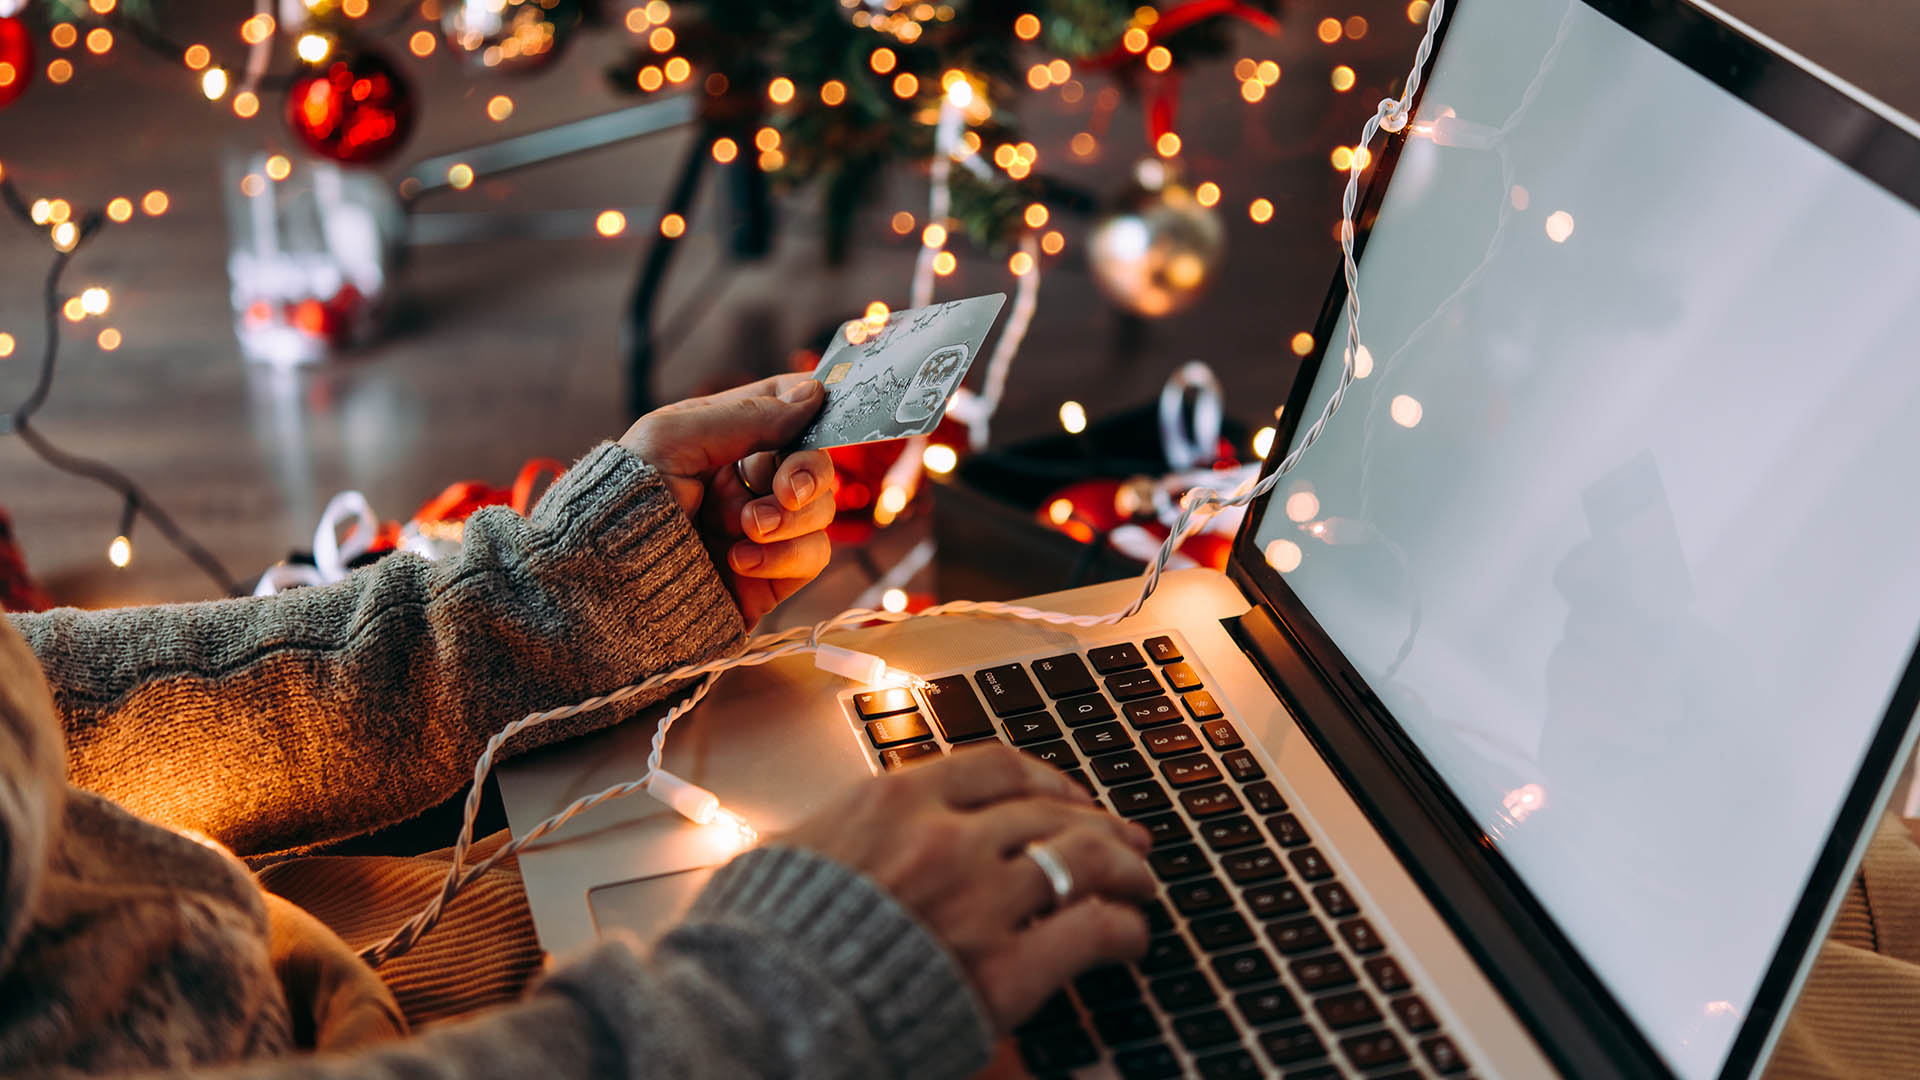 5 Insights from Facebook’s 2020 Christmas Marketing Guide